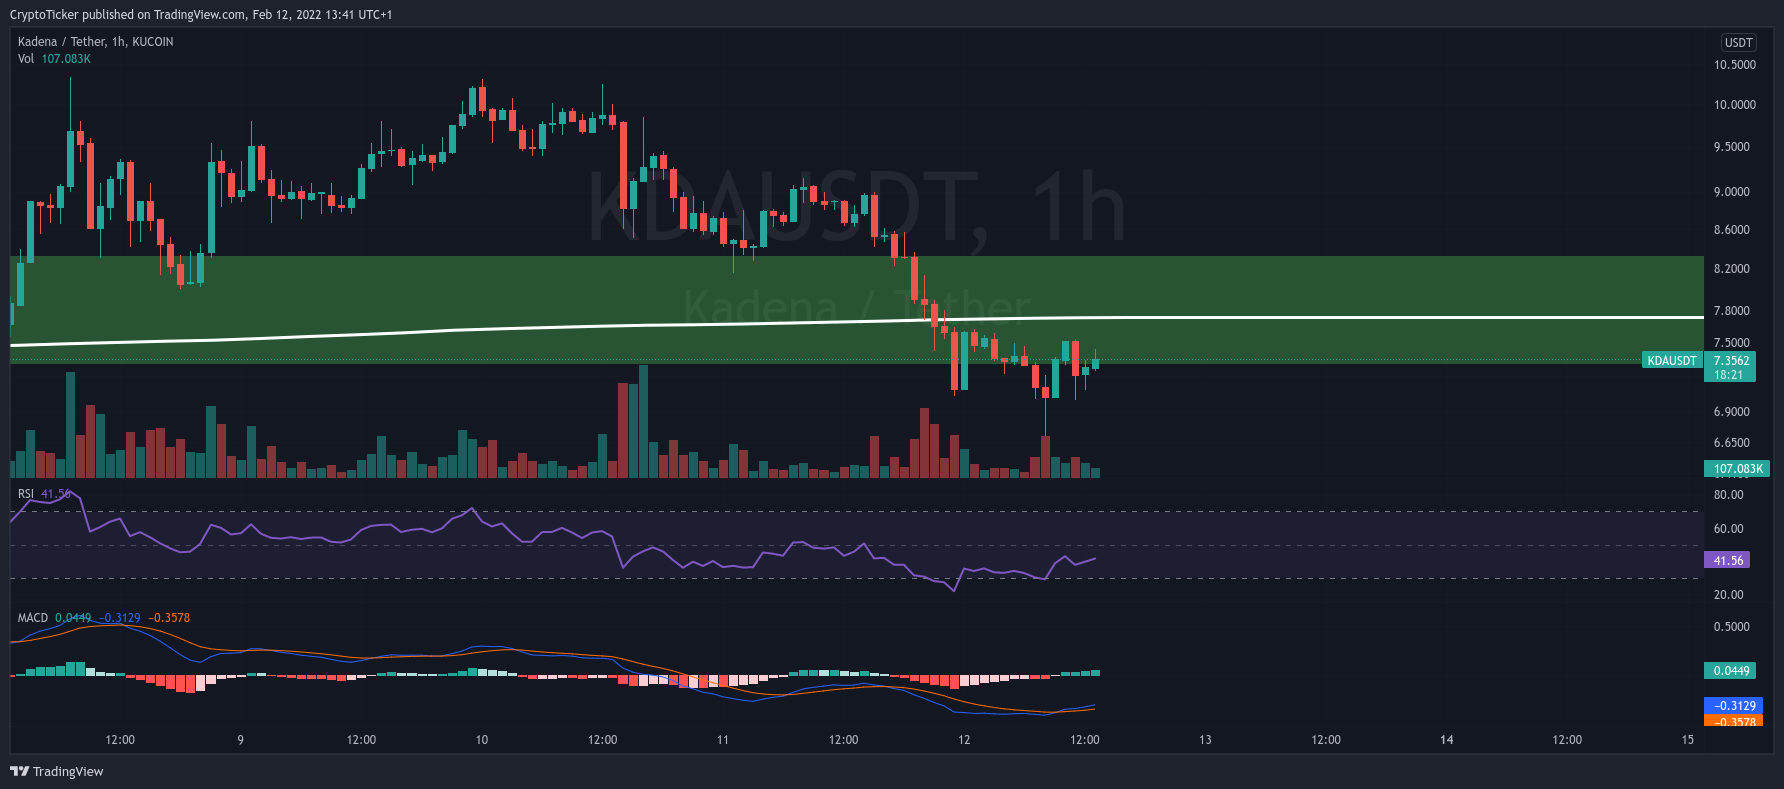 KDA price chart showing the drop in its price in the past 7 days